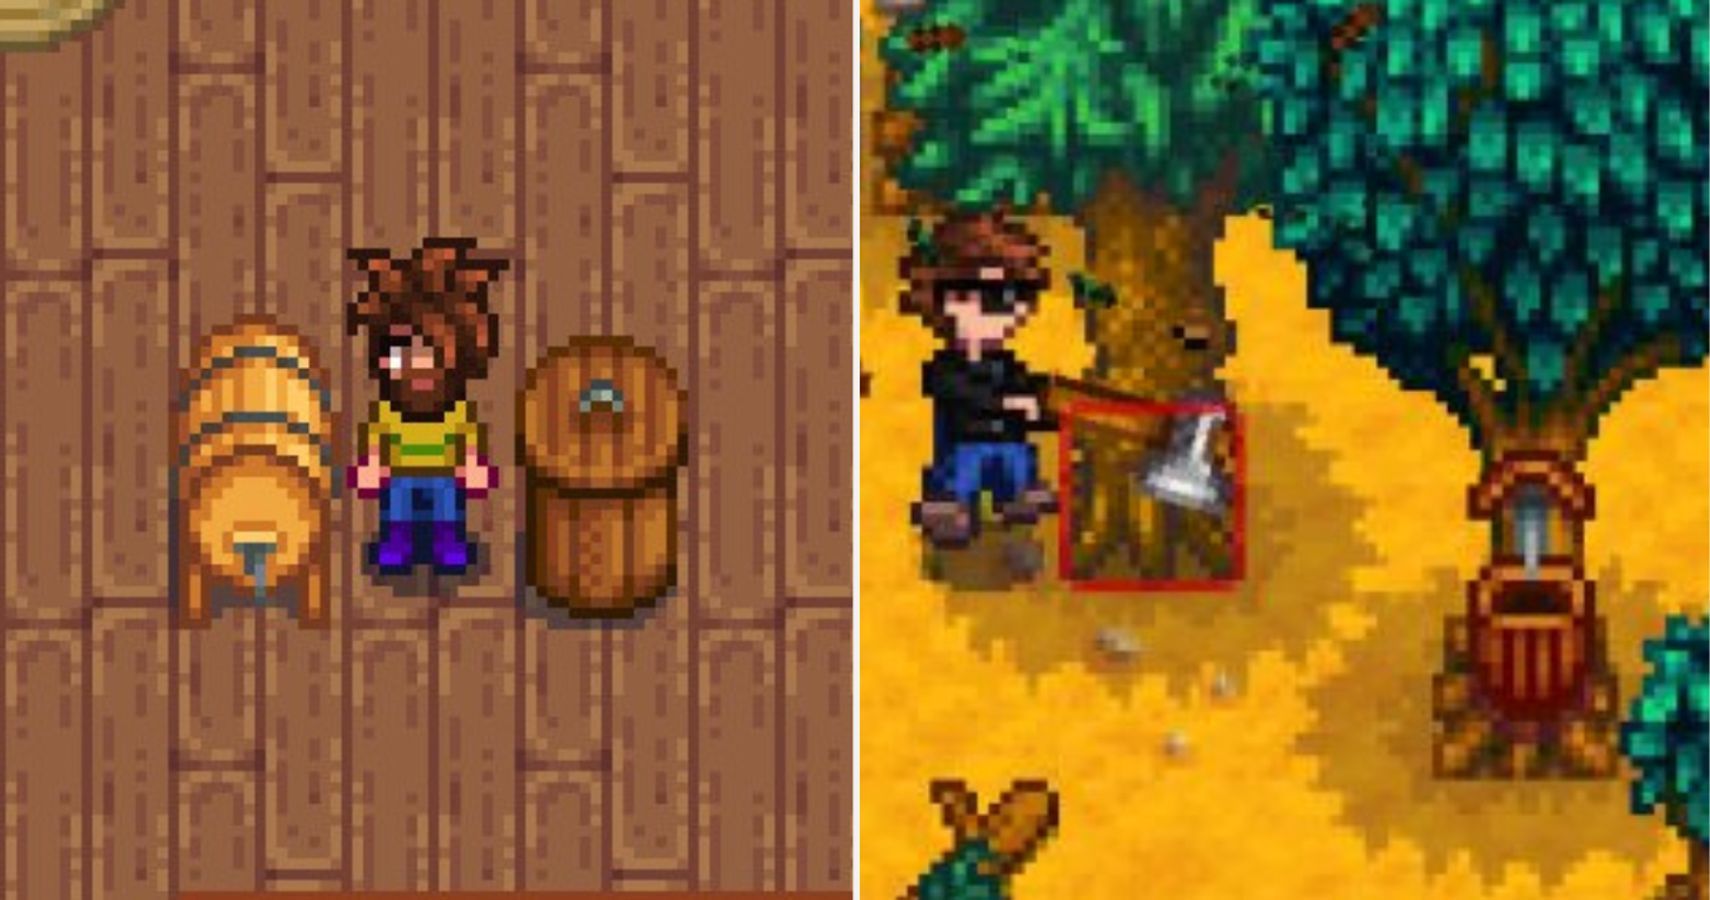 stardew valley silo crafting materials needed